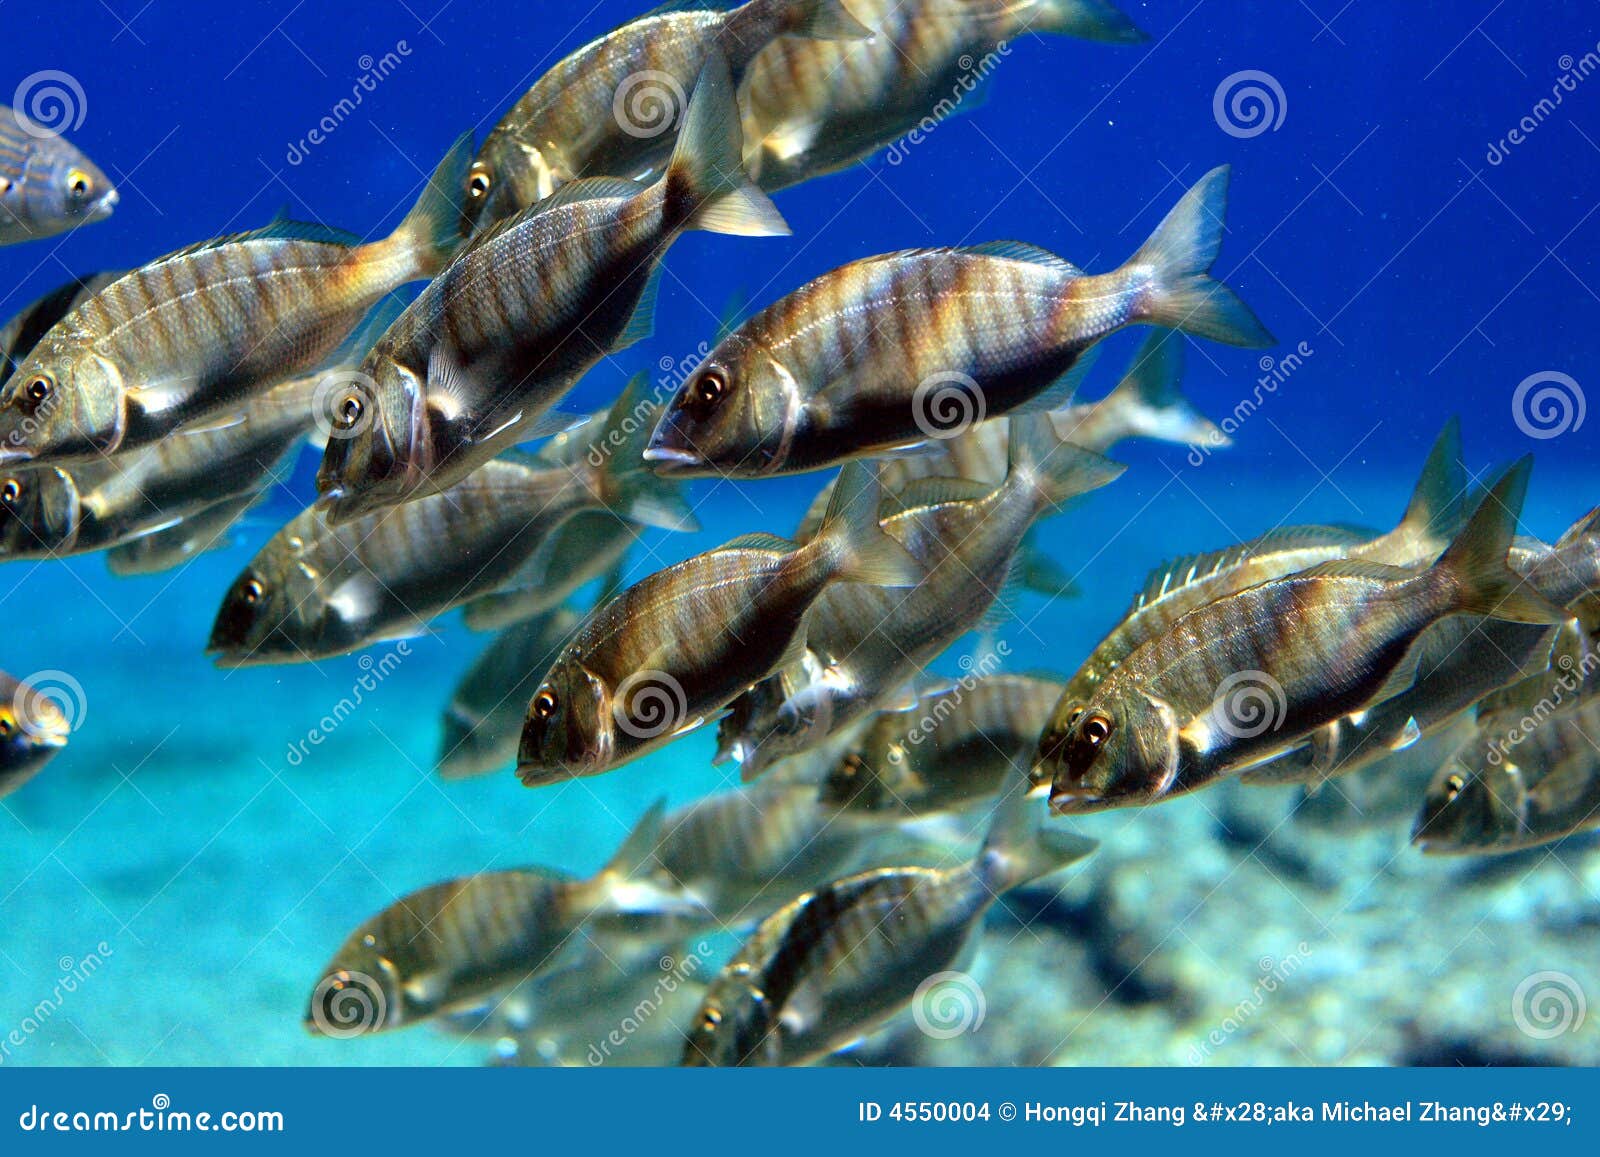 A large school of tropical fish